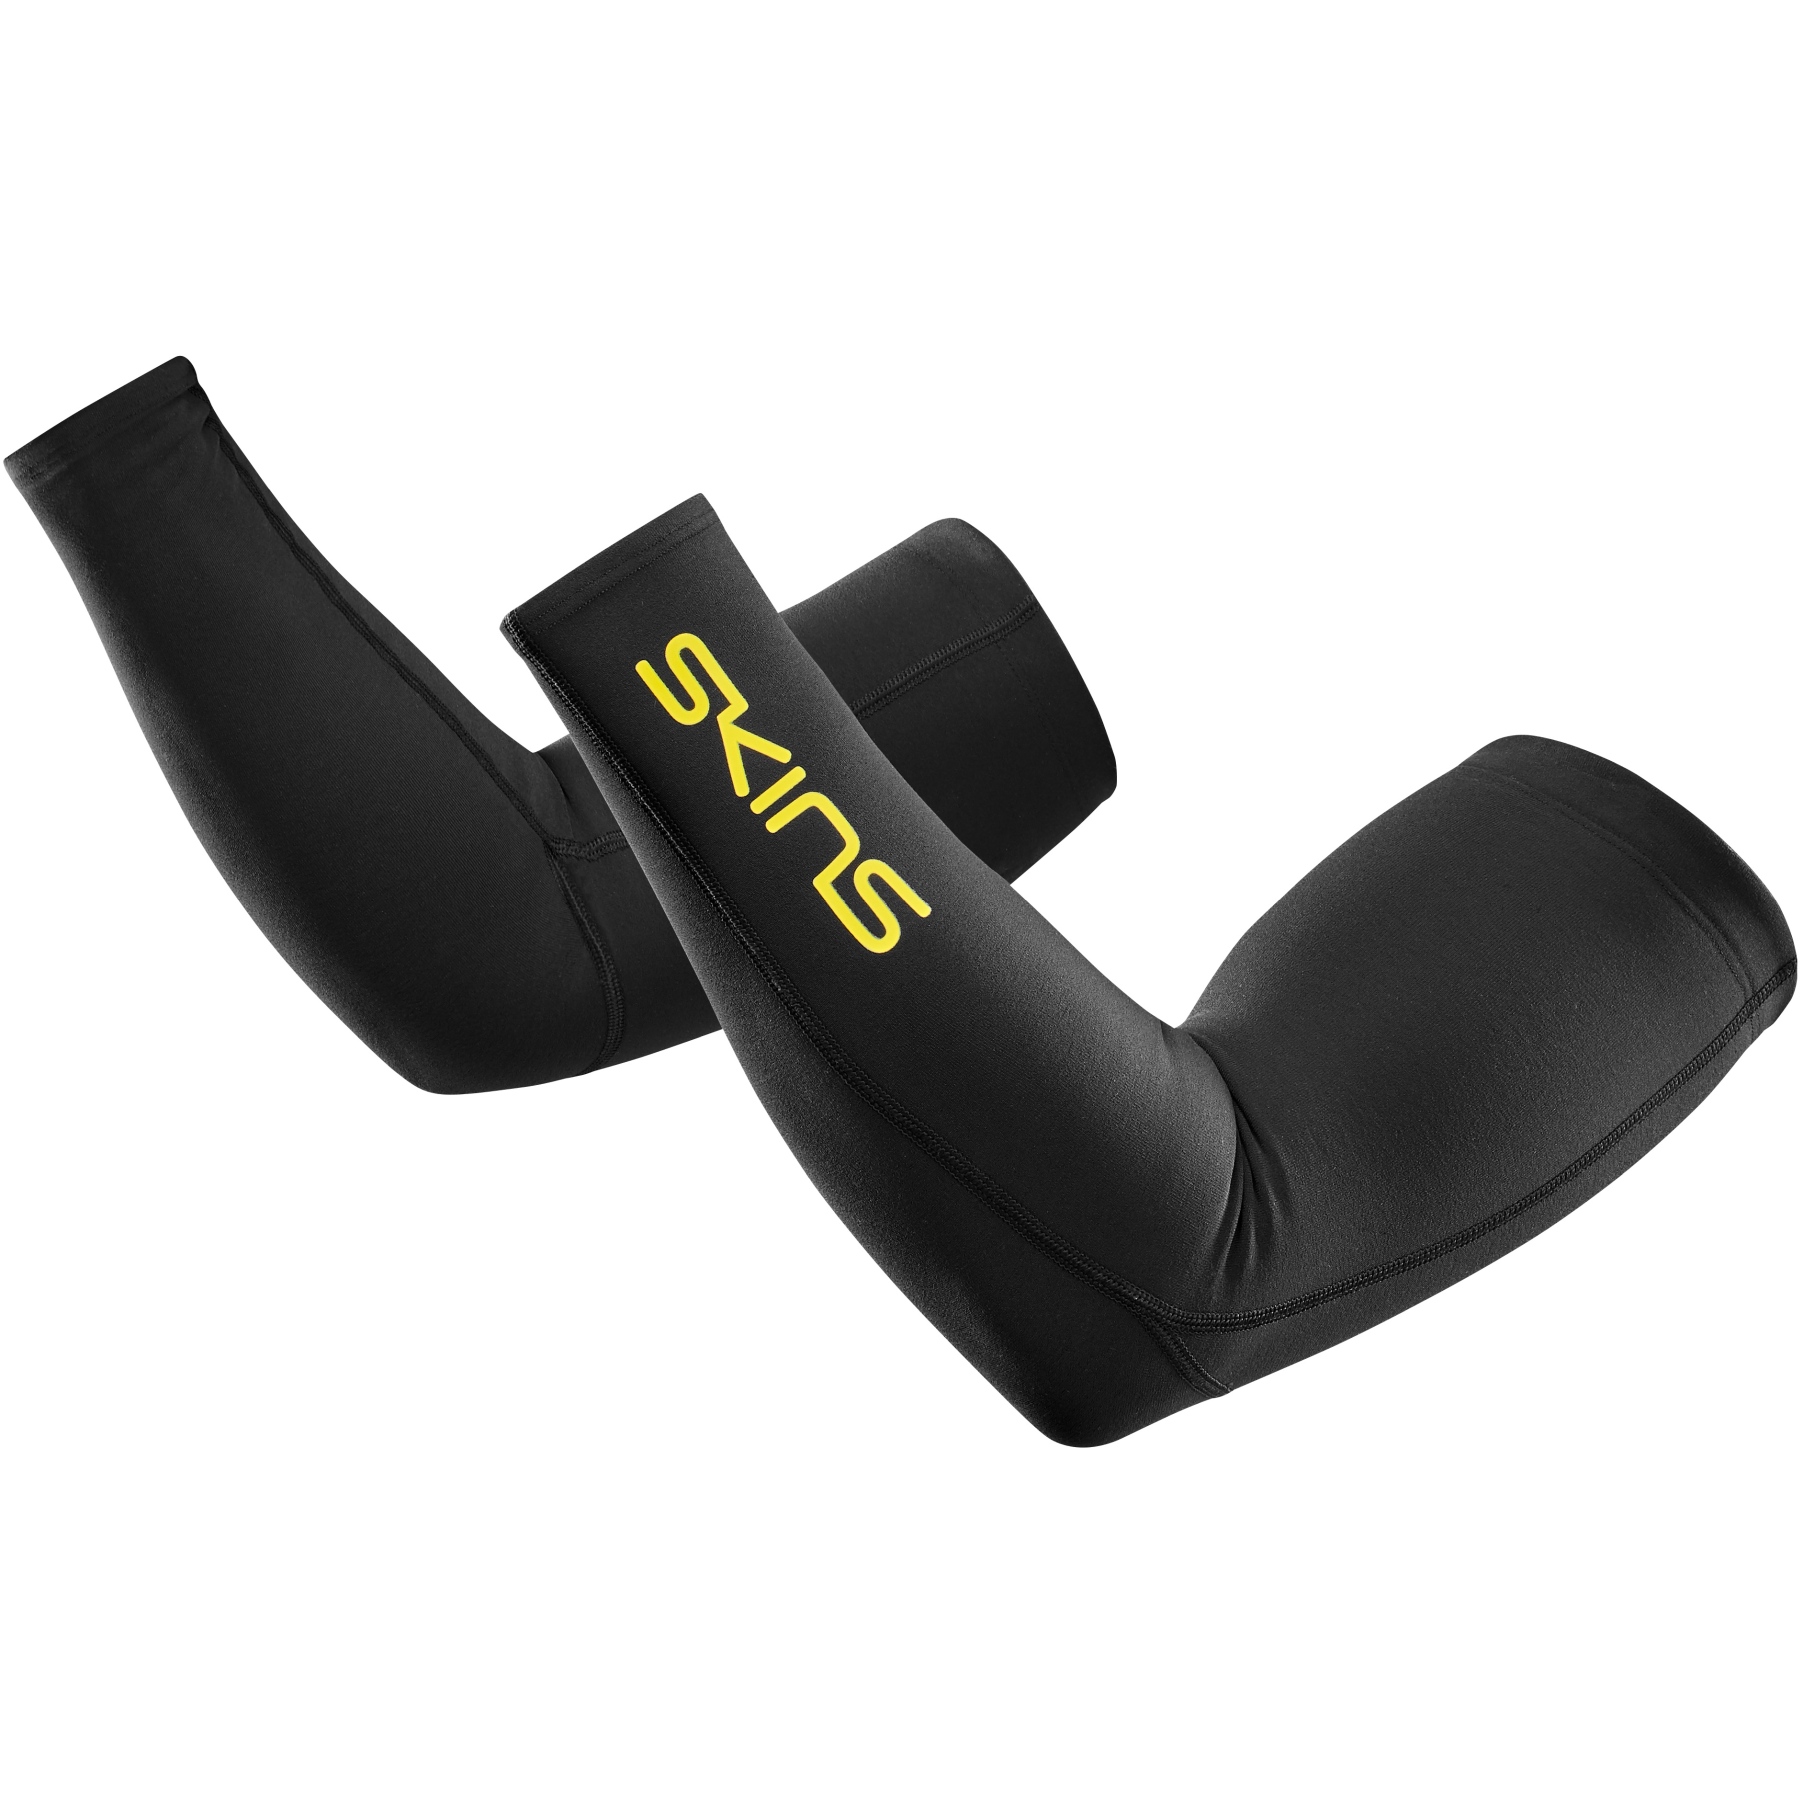 Image of SKINS CYCLE Compression Arm Warmer - Black